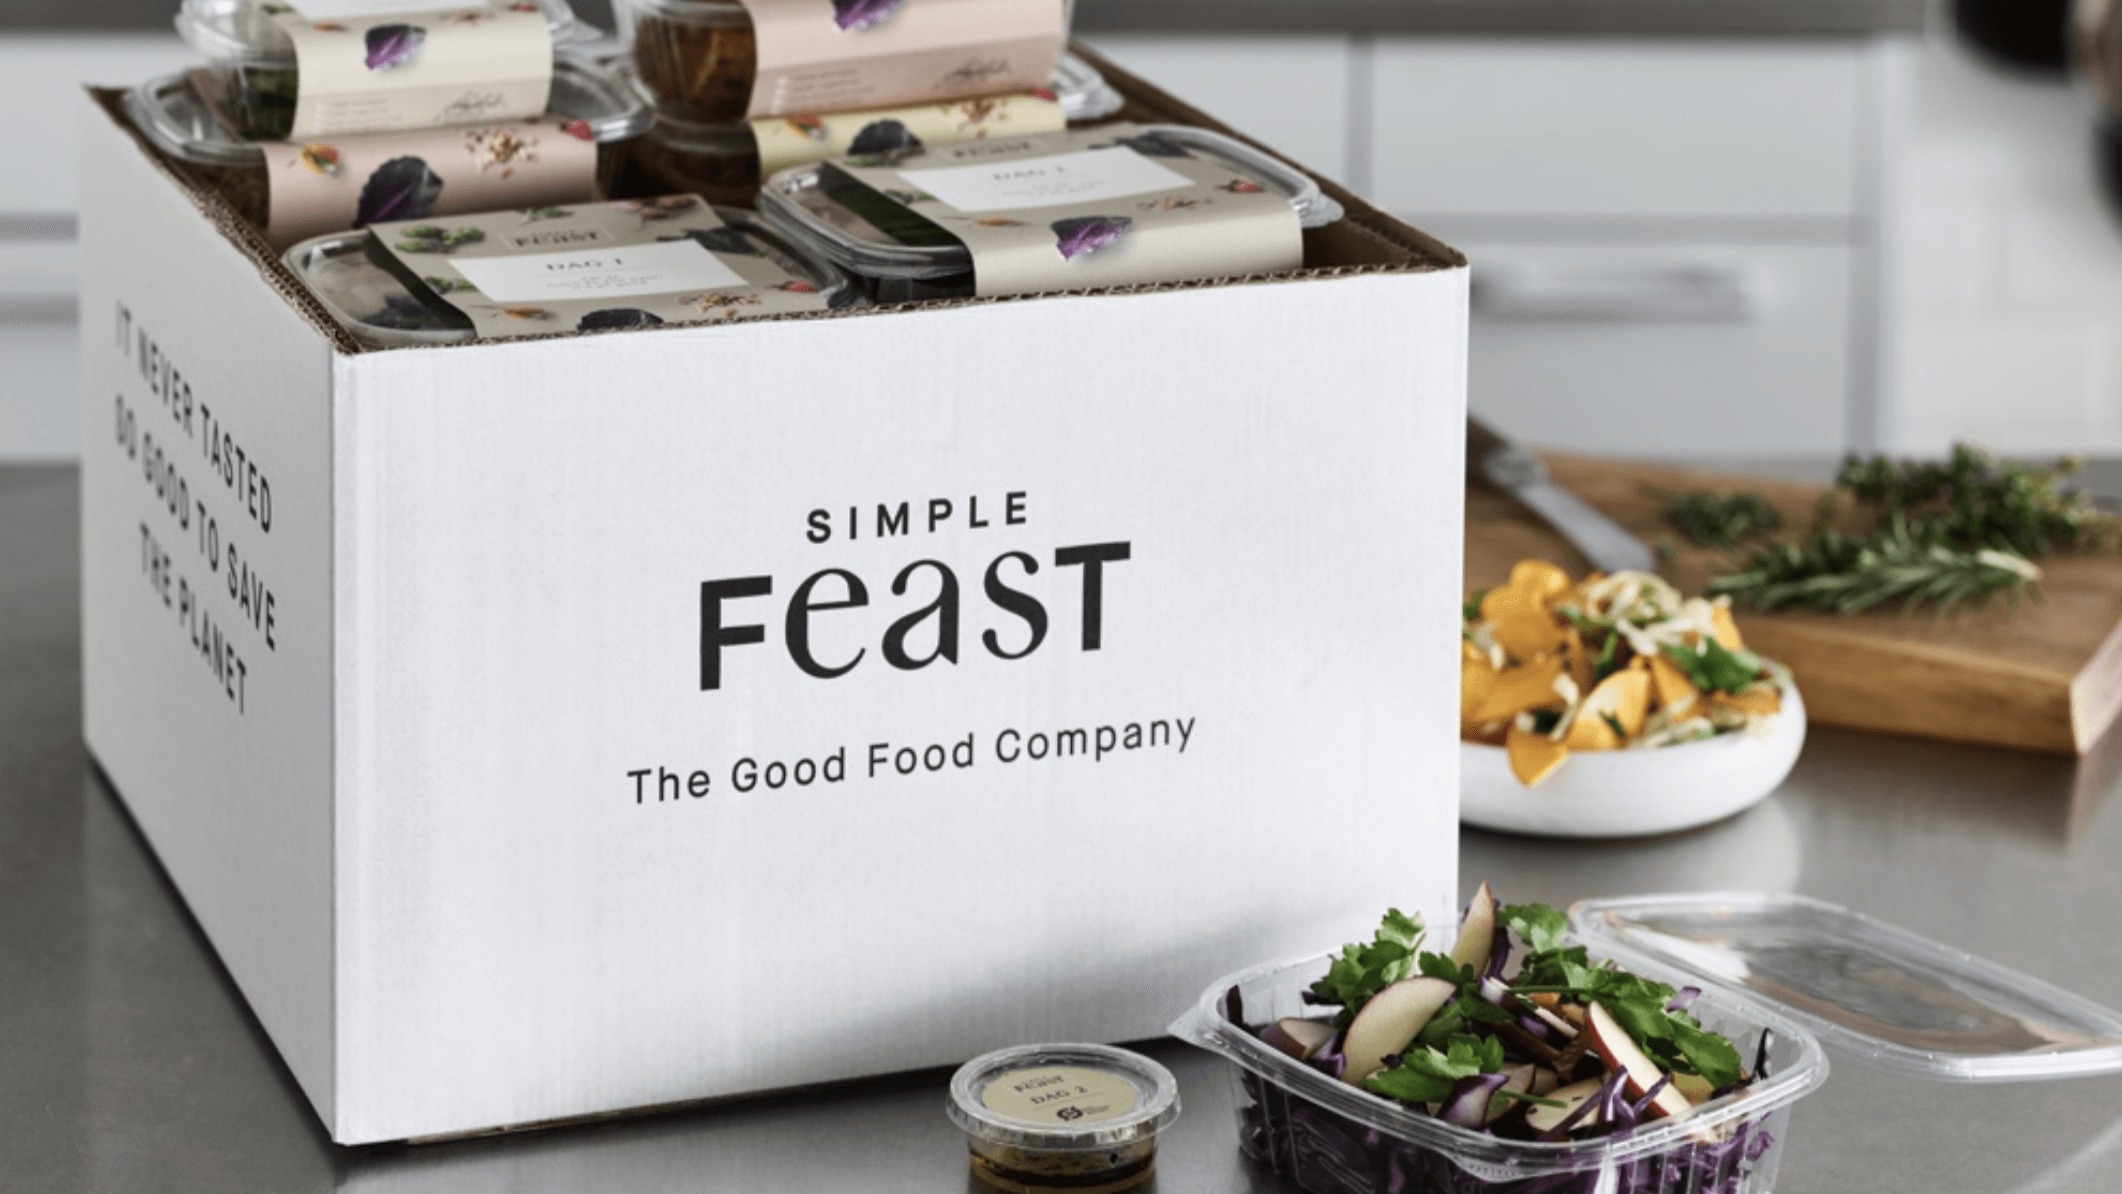 Danish Company Raises $12M to Expand Vegan Meal Delivery Service